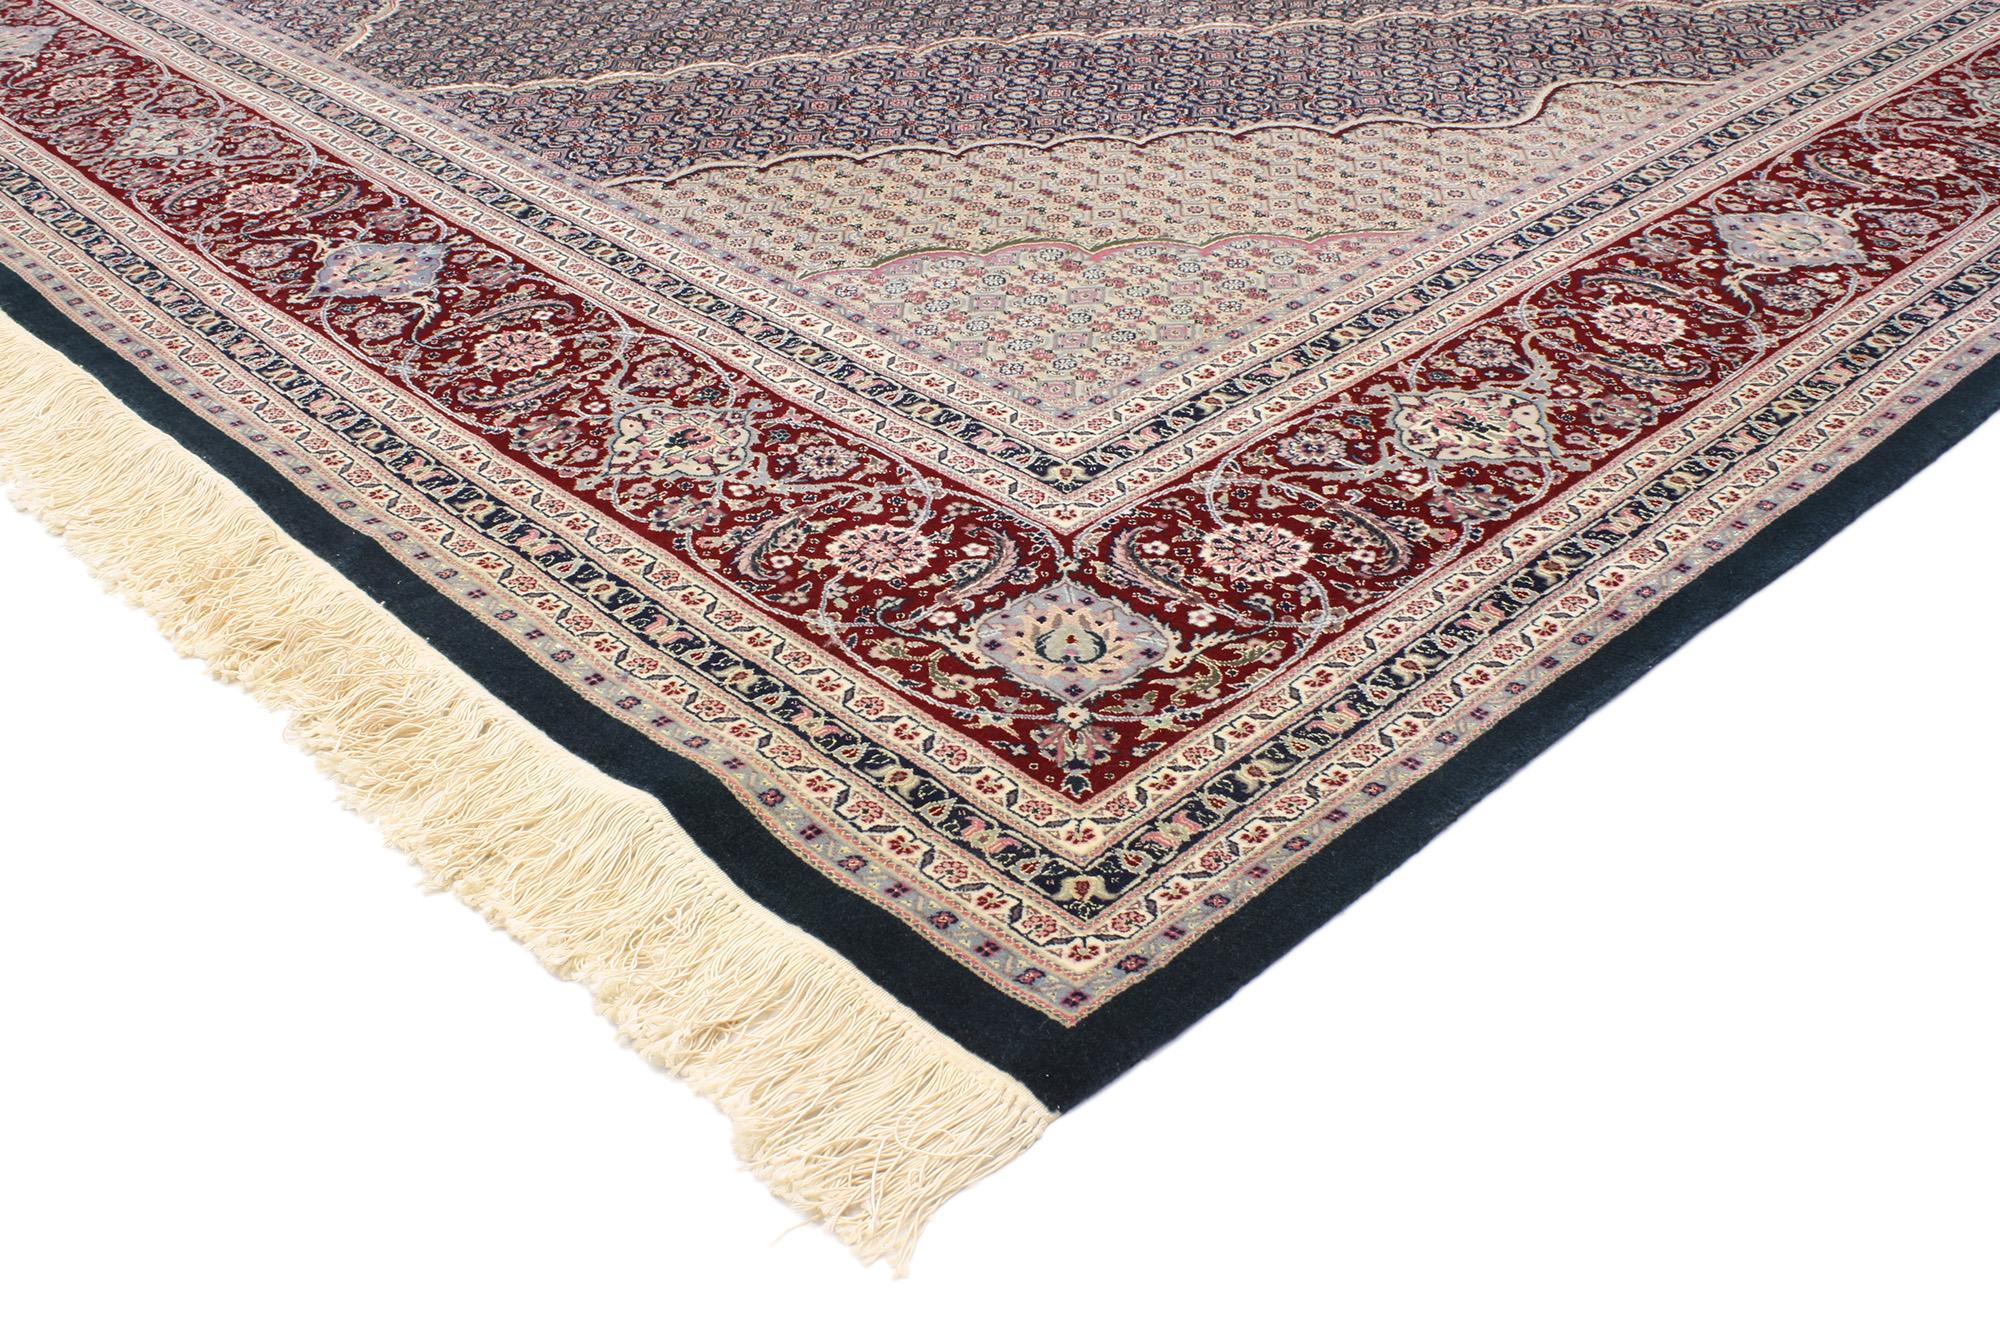 76867 Vintage Chinese Tabriz Rug, 09'08 x 13'07. Chinese Tabriz rugs are a style of traditional handmade rugs crafted in China, inspired by the designs of Tabriz rugs from Iran. They feature intricate floral motifs, geometric patterns, and elaborate